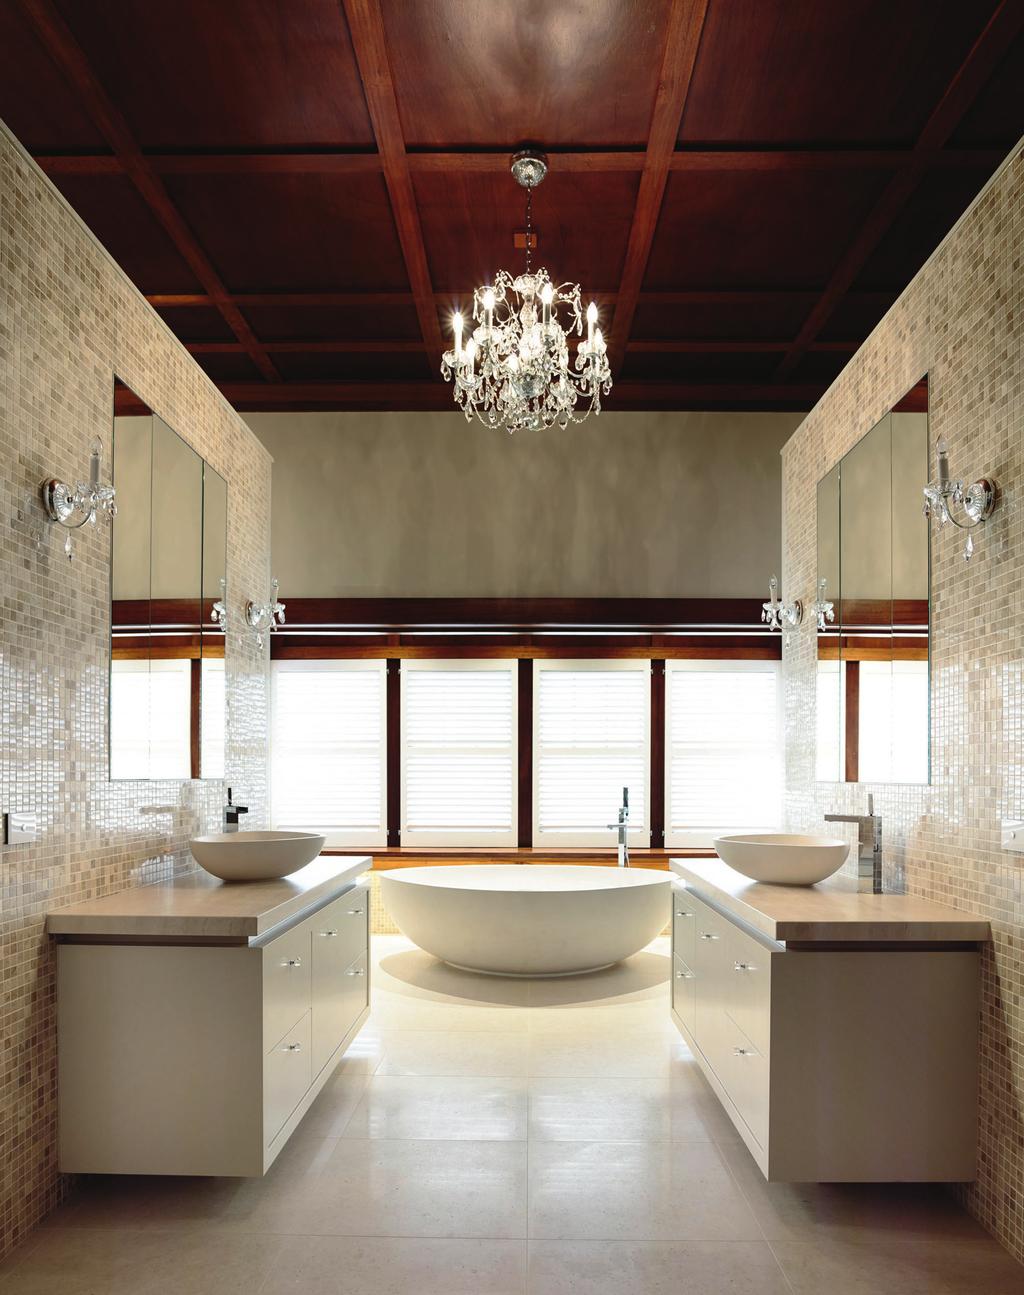 142 The timber finishes add a traditional feel to this dramatic and grand bathroom.